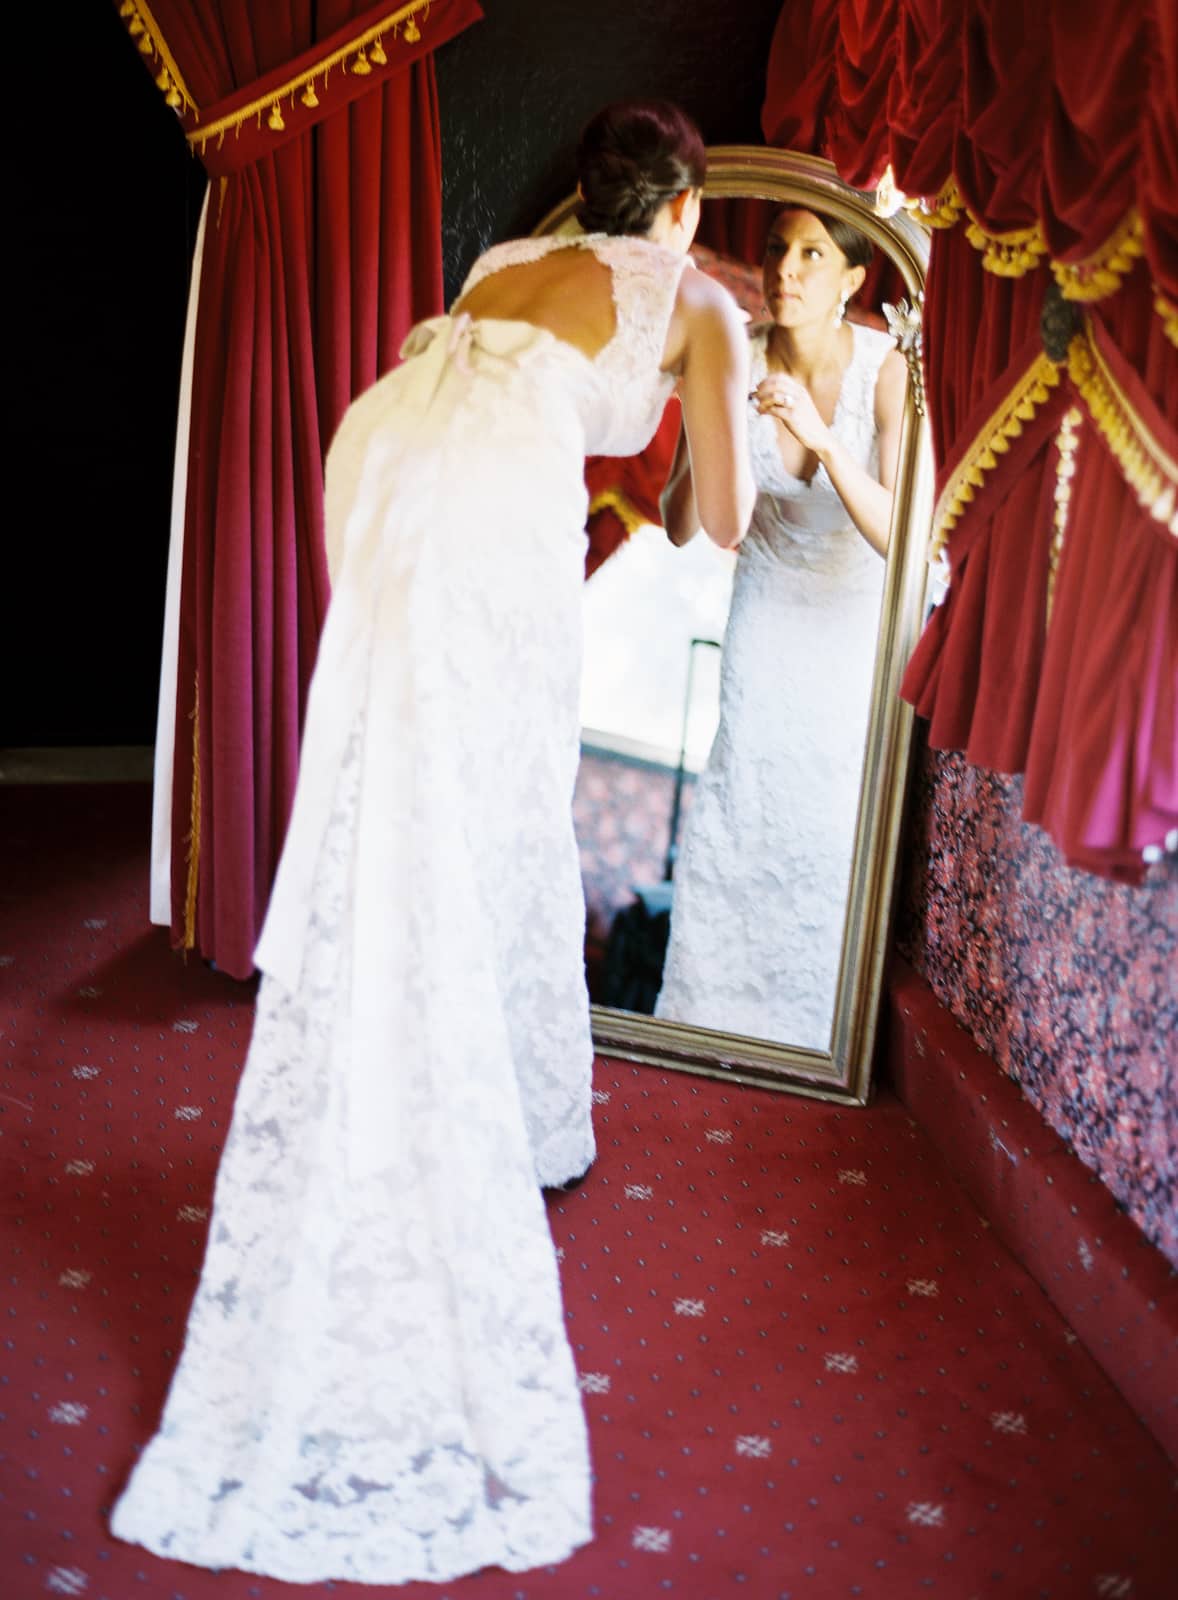 Bride checking her makeup in the mirror with red drapes